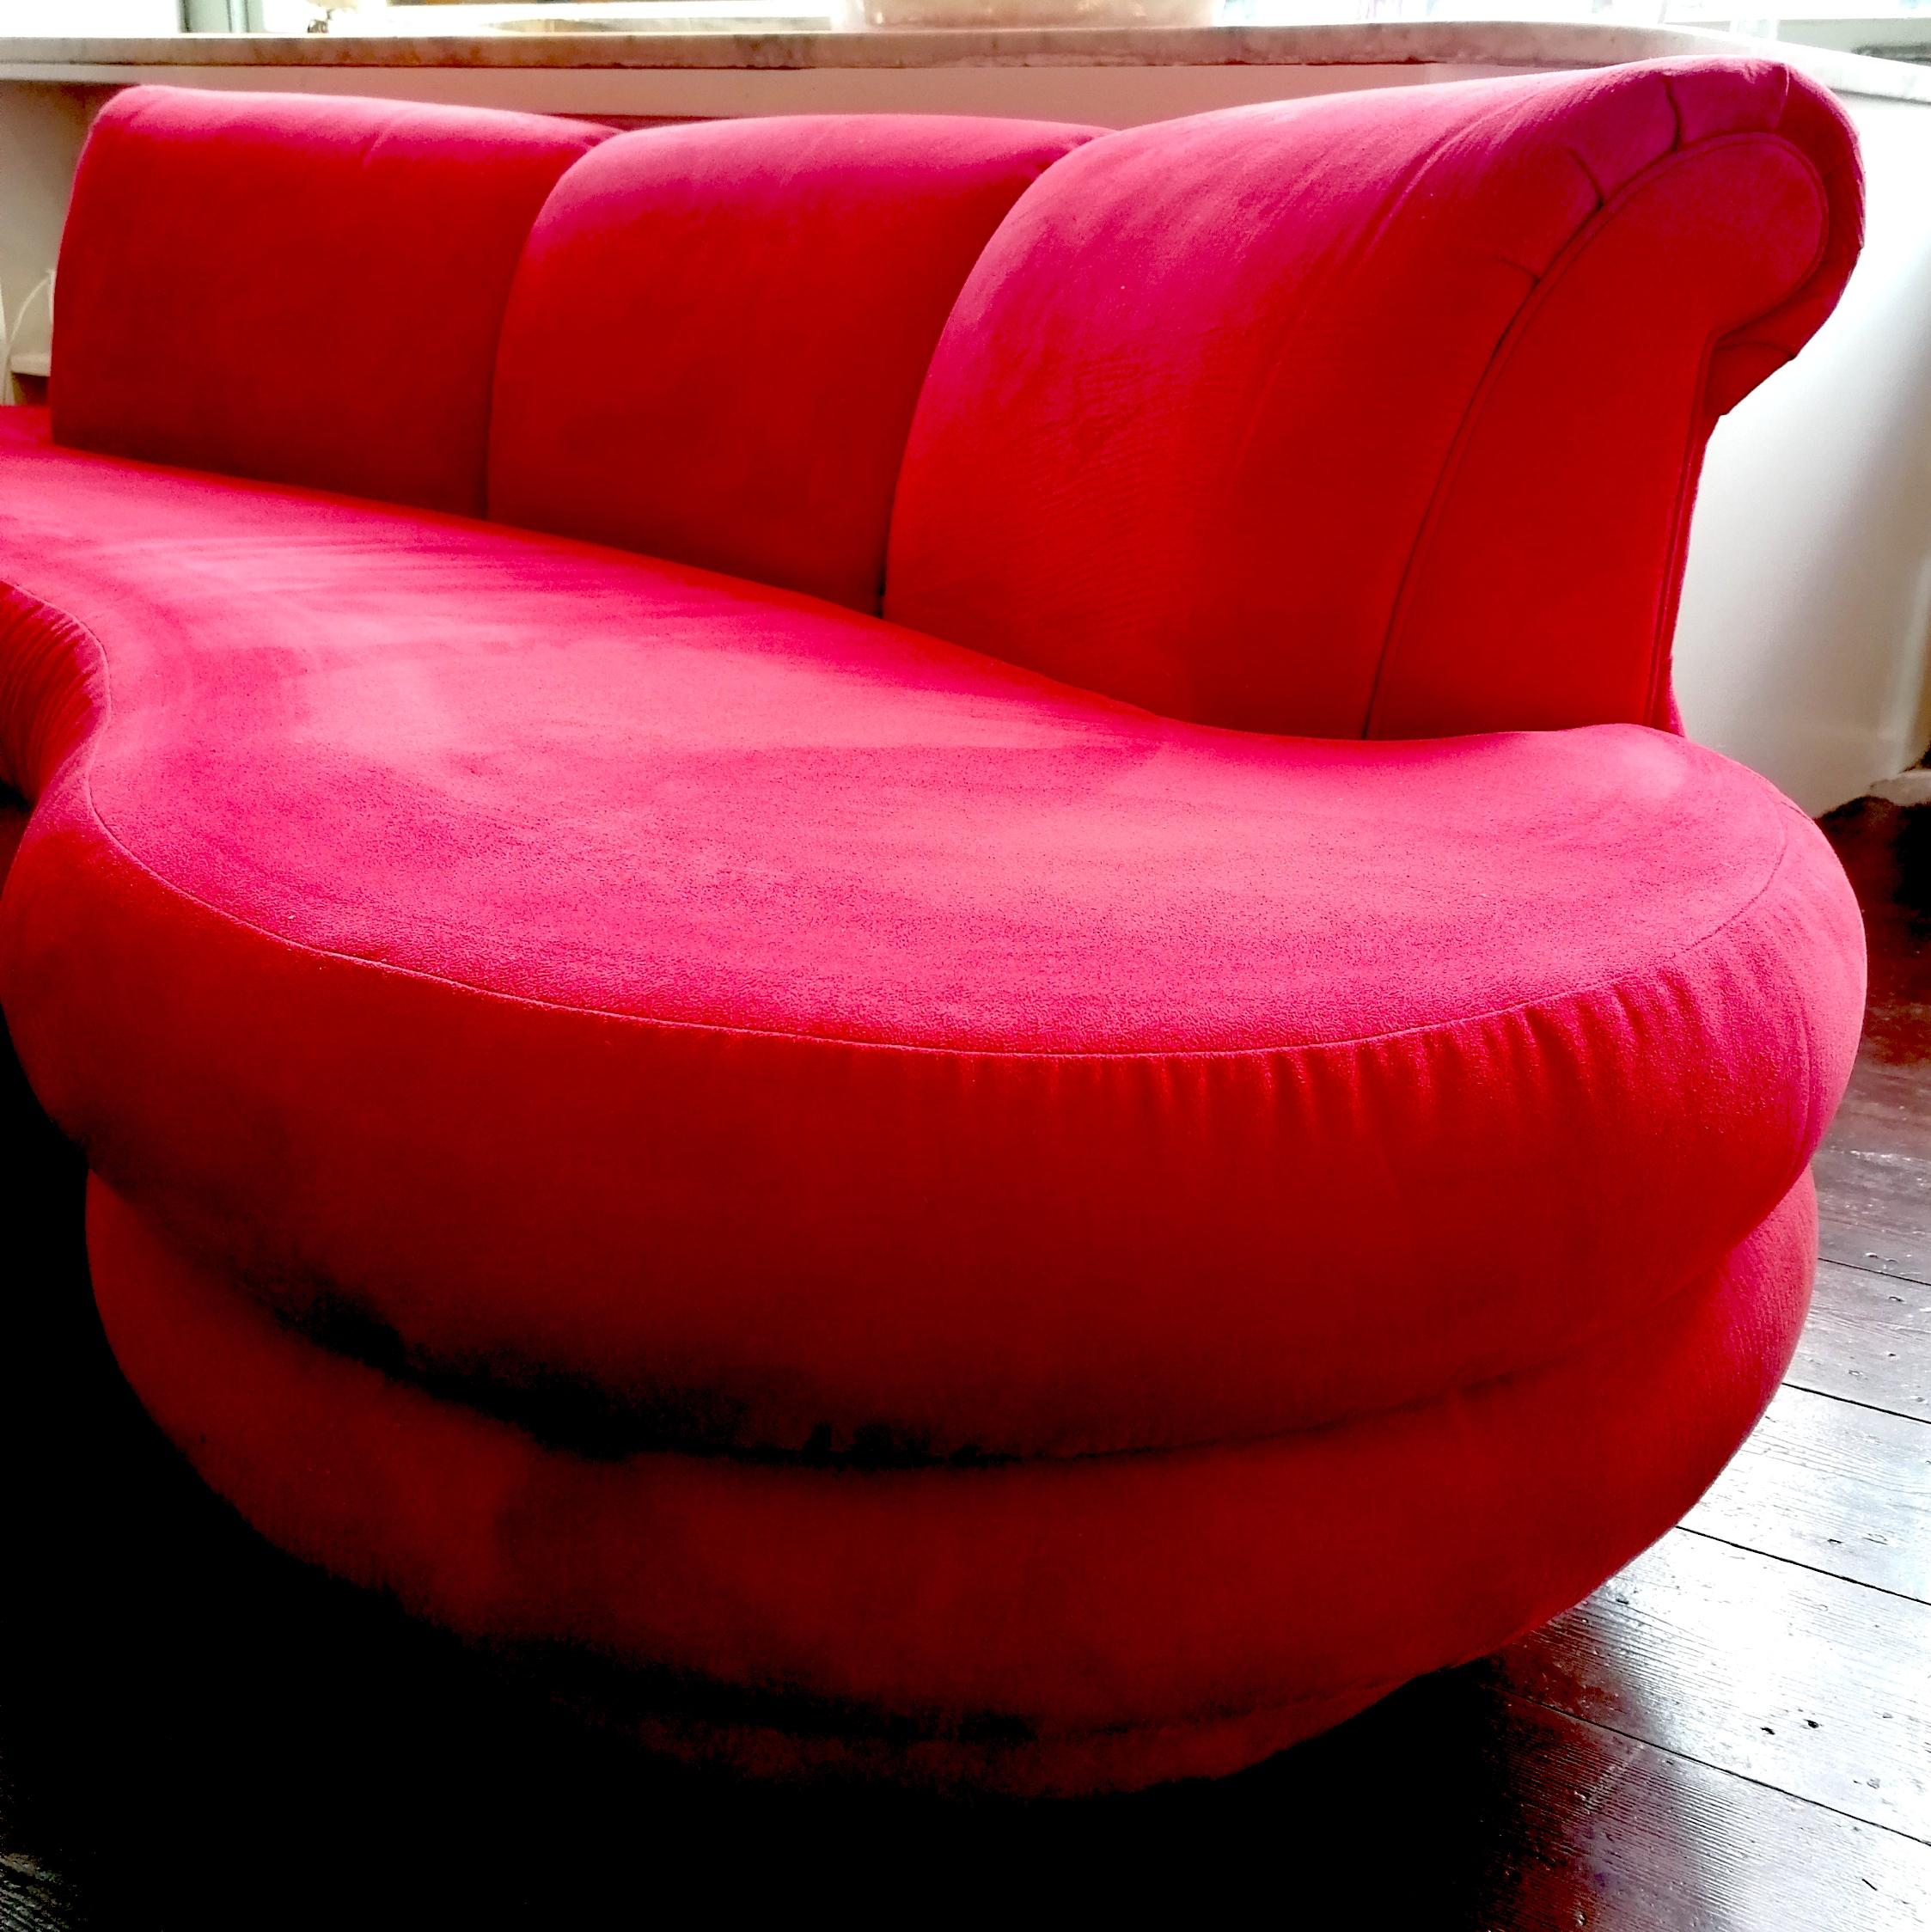 Sculptural curved cloud sofa by Adrian Pearsall for Comfort Designs, USA 1980s.  1